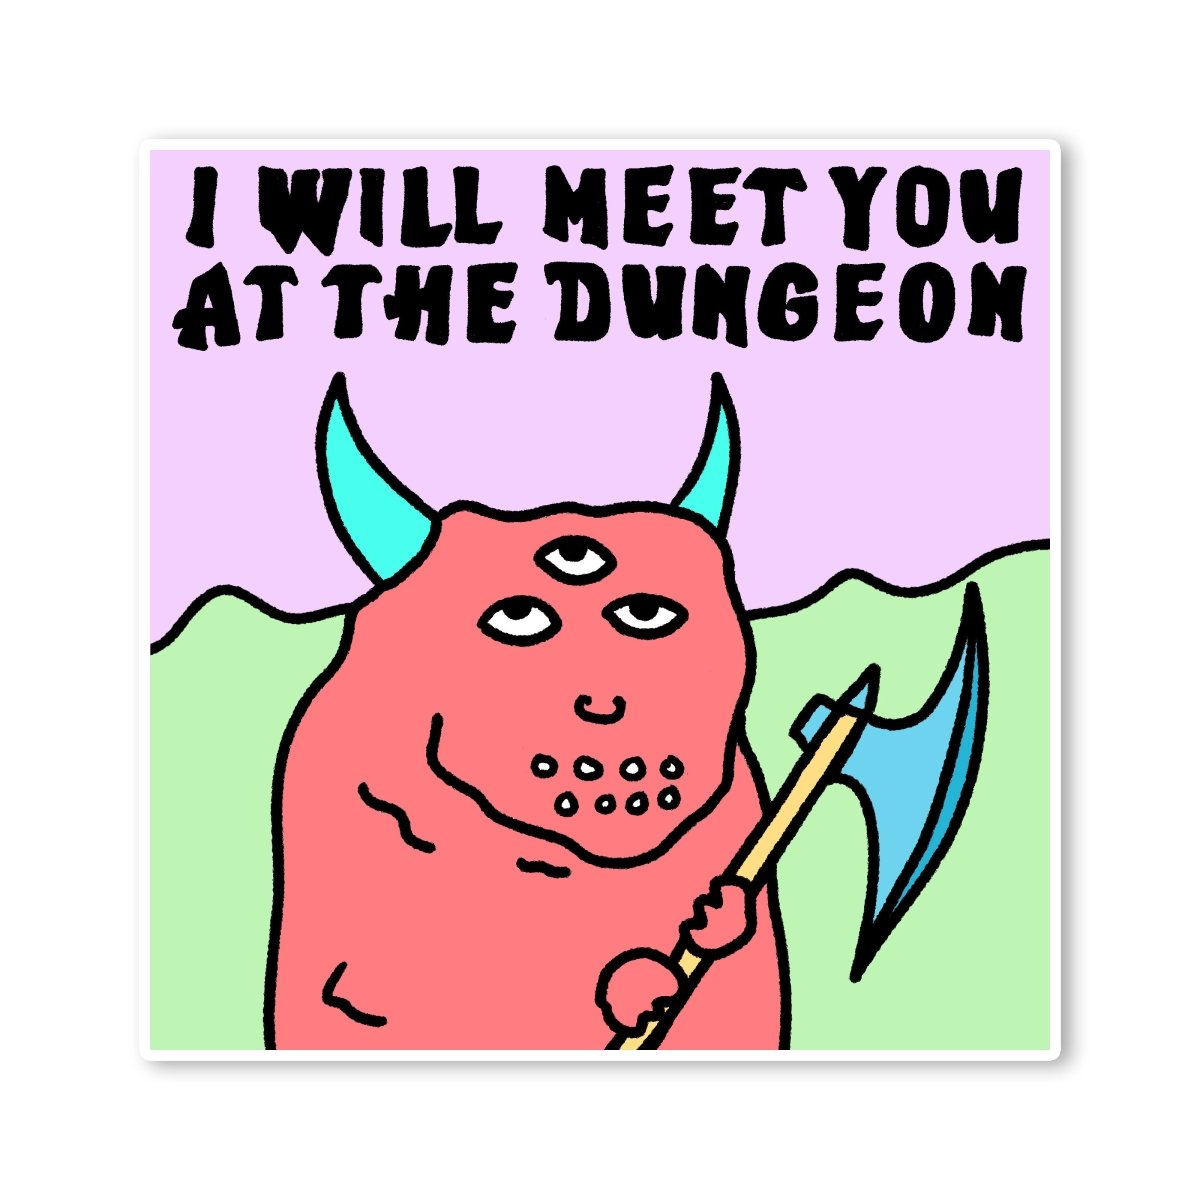 Meet you at the dungeon sticker - Sticker - Pretty Bad Co.